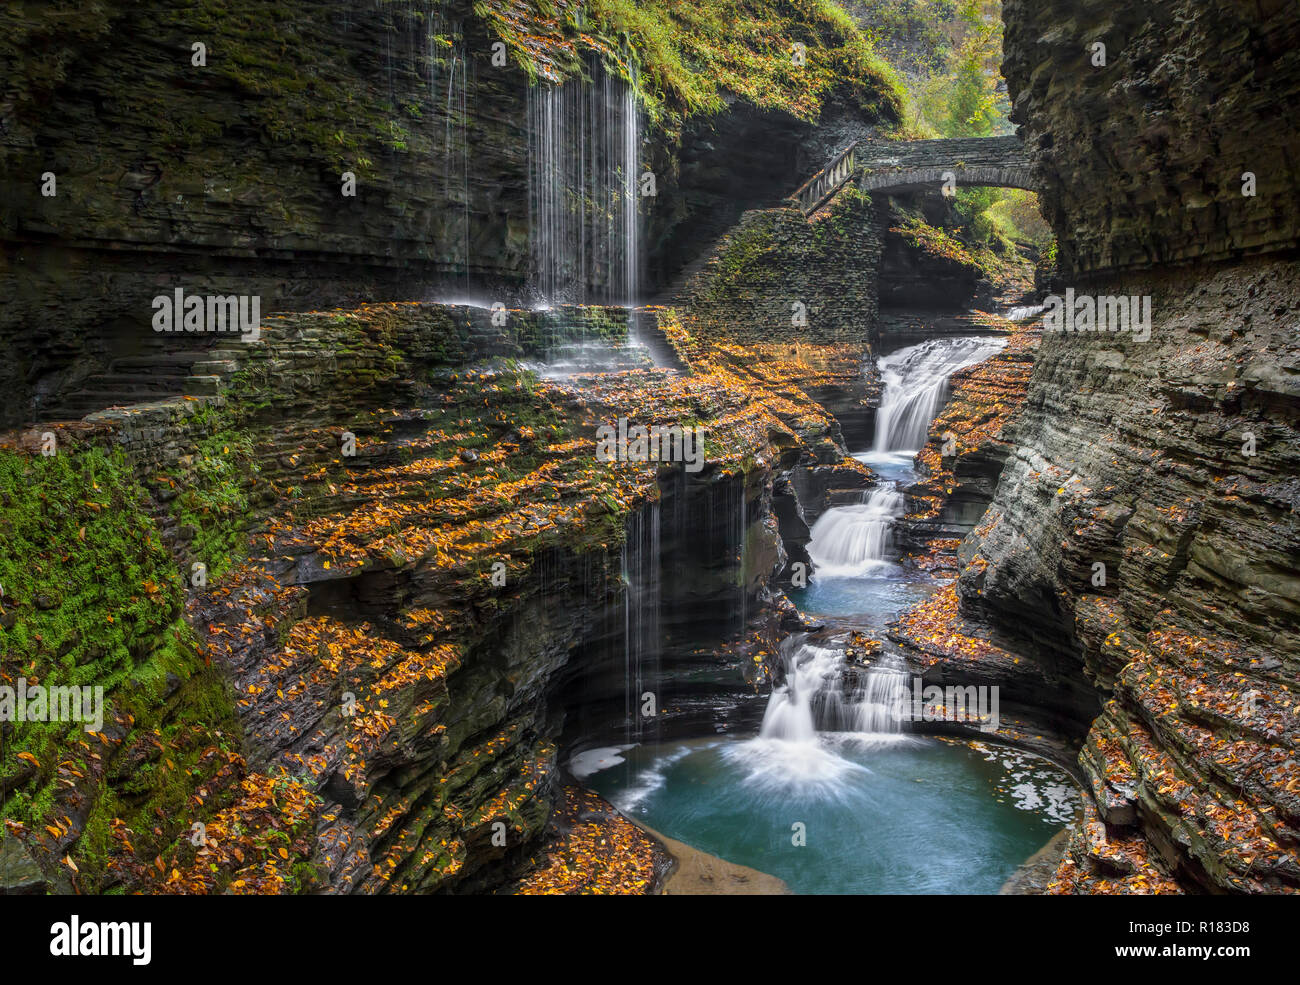 Surrounded by colorful fallen autumn leaves, water plunges and cascades through a rocky gorge at Watkins Glen State Park's Rainbow Falls in the Finger Stock Photo